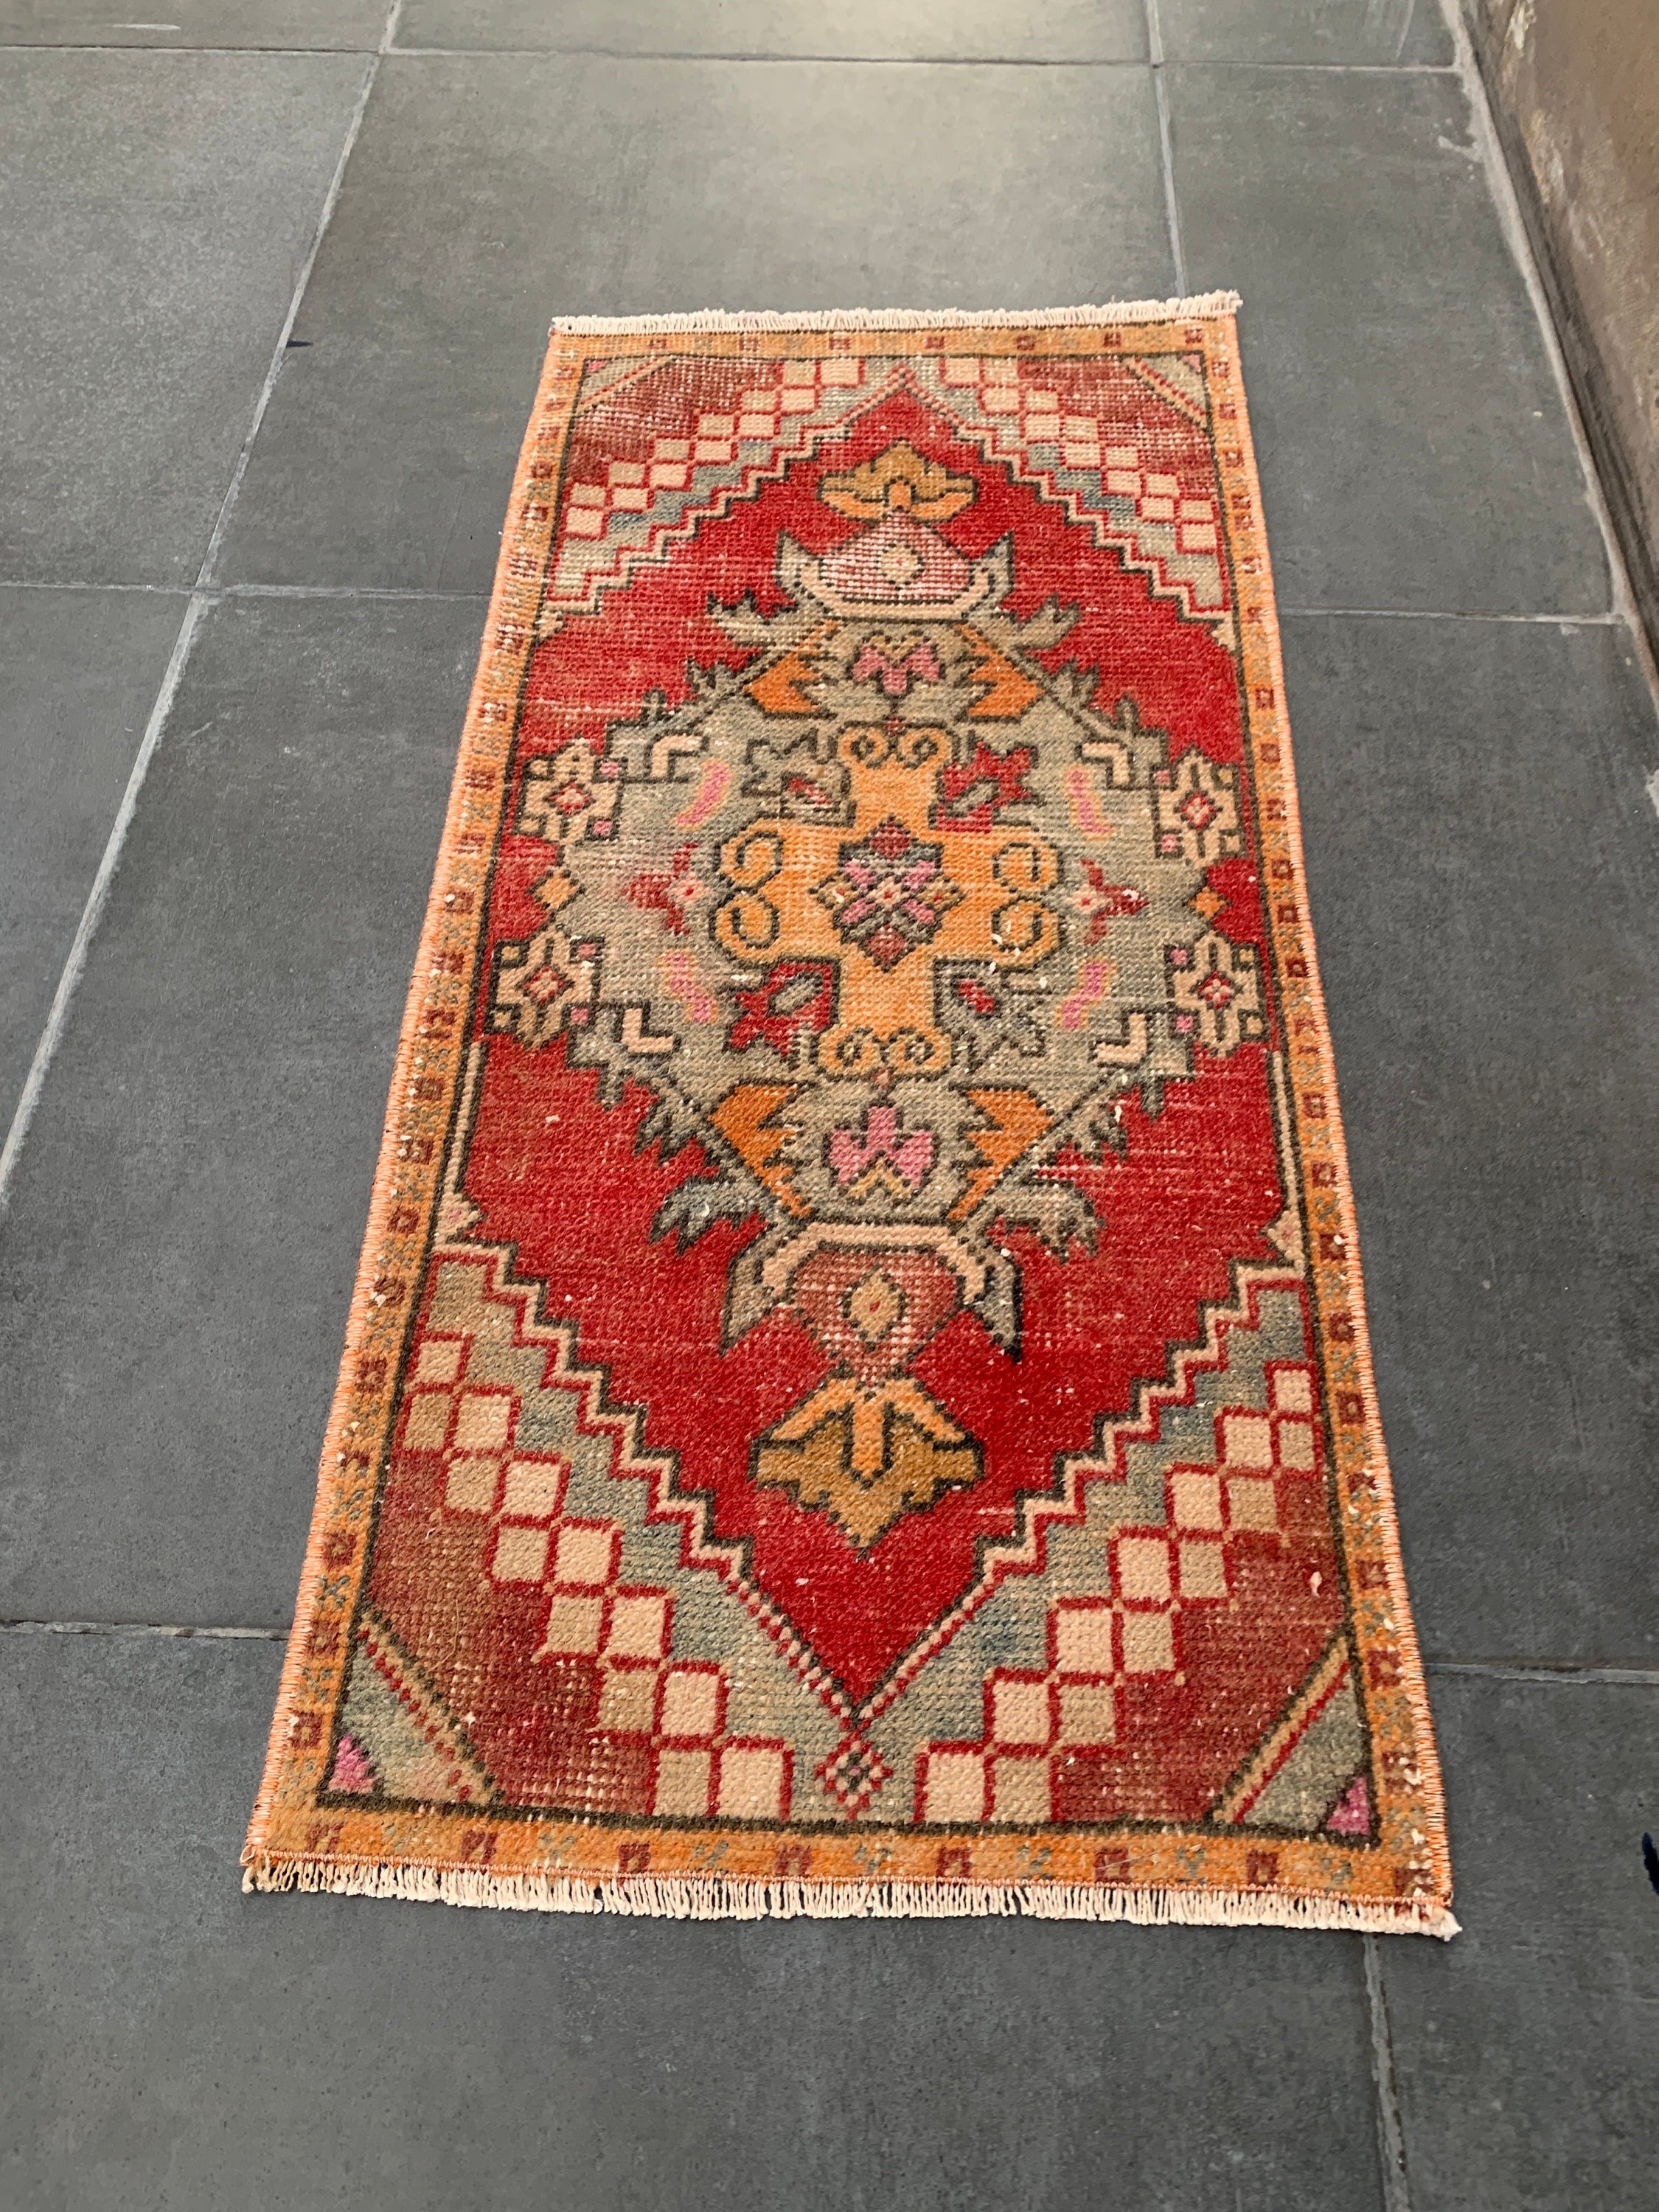 Bedroom Rugs, Moroccan Rugs, Rugs for Car Mat, Vintage Rug, Nomadic Rug, 1.5x3.1 ft Small Rug, Bath Rugs, Turkish Rugs, Red Home Decor Rugs